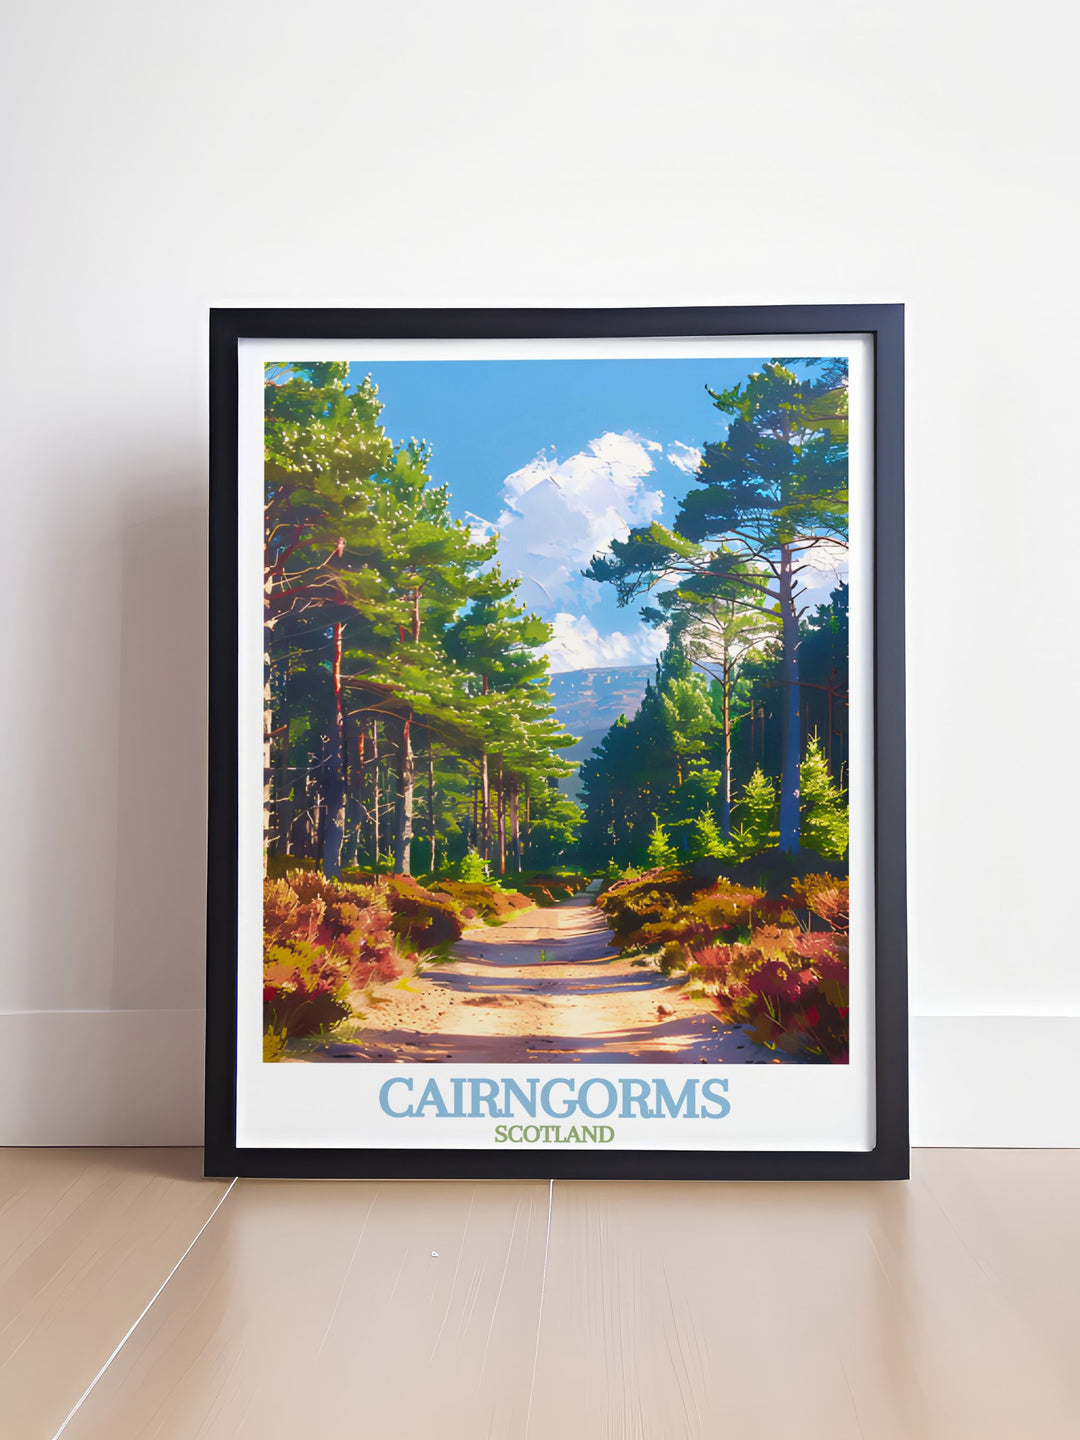 Rothiemurchus Forest home decor piece showcasing the serene and picturesque landscapes of the Cairngorms. Adds a focal point to your living space. High quality print with vibrant colors and intricate details, ideal for home or office decor.